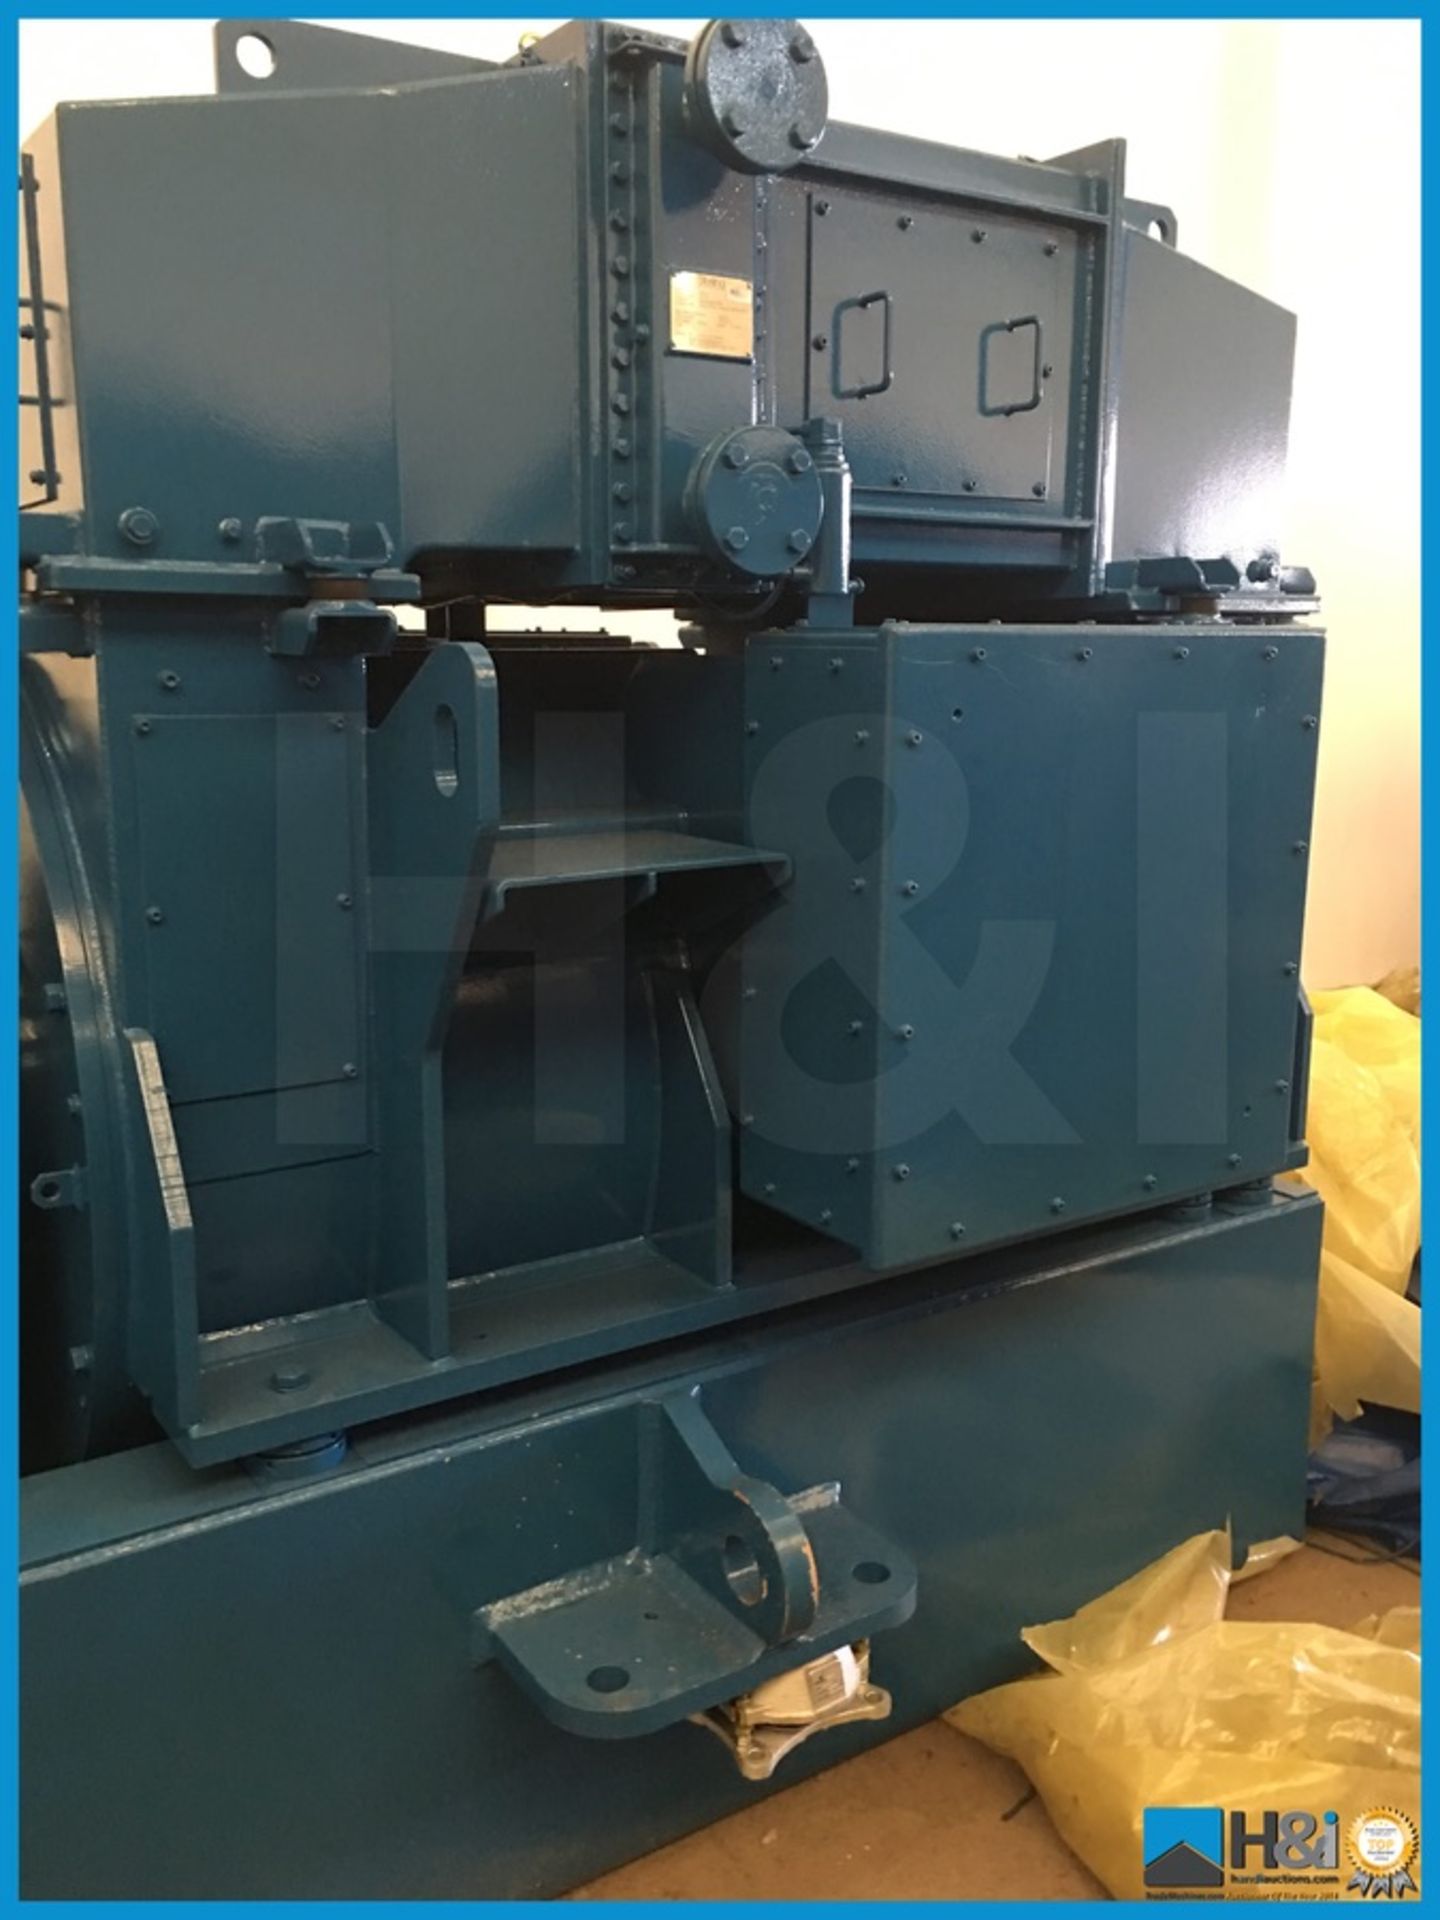 Unused Wartsila 9L20 high capacity diesel generator manufactured in 2013 for a large marine - Image 7 of 17